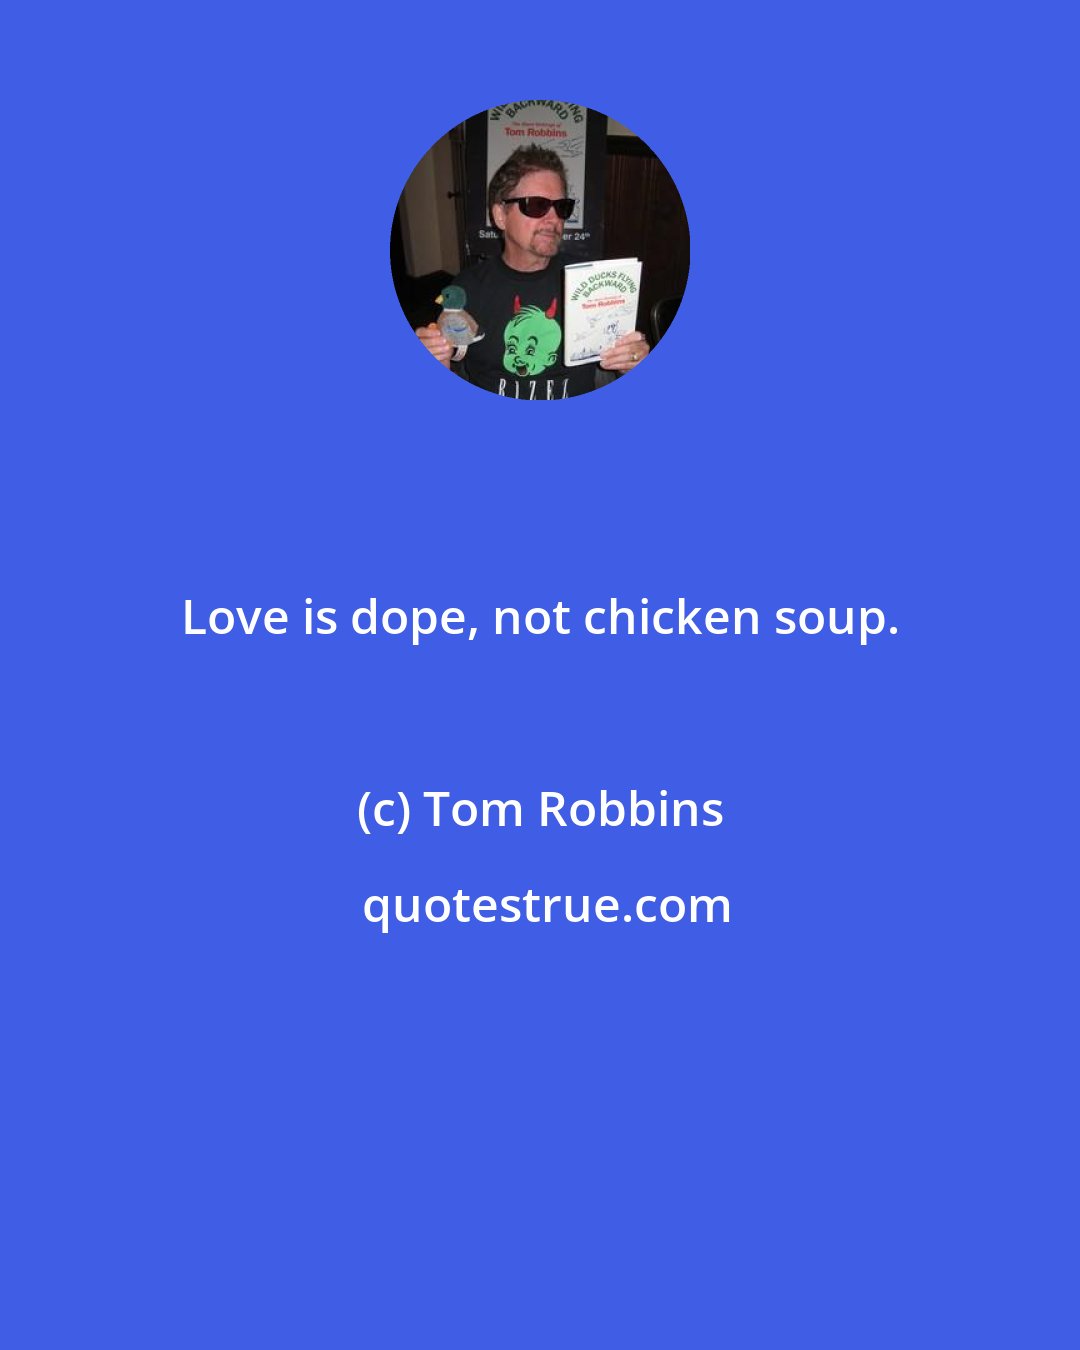 Tom Robbins: Love is dope, not chicken soup.